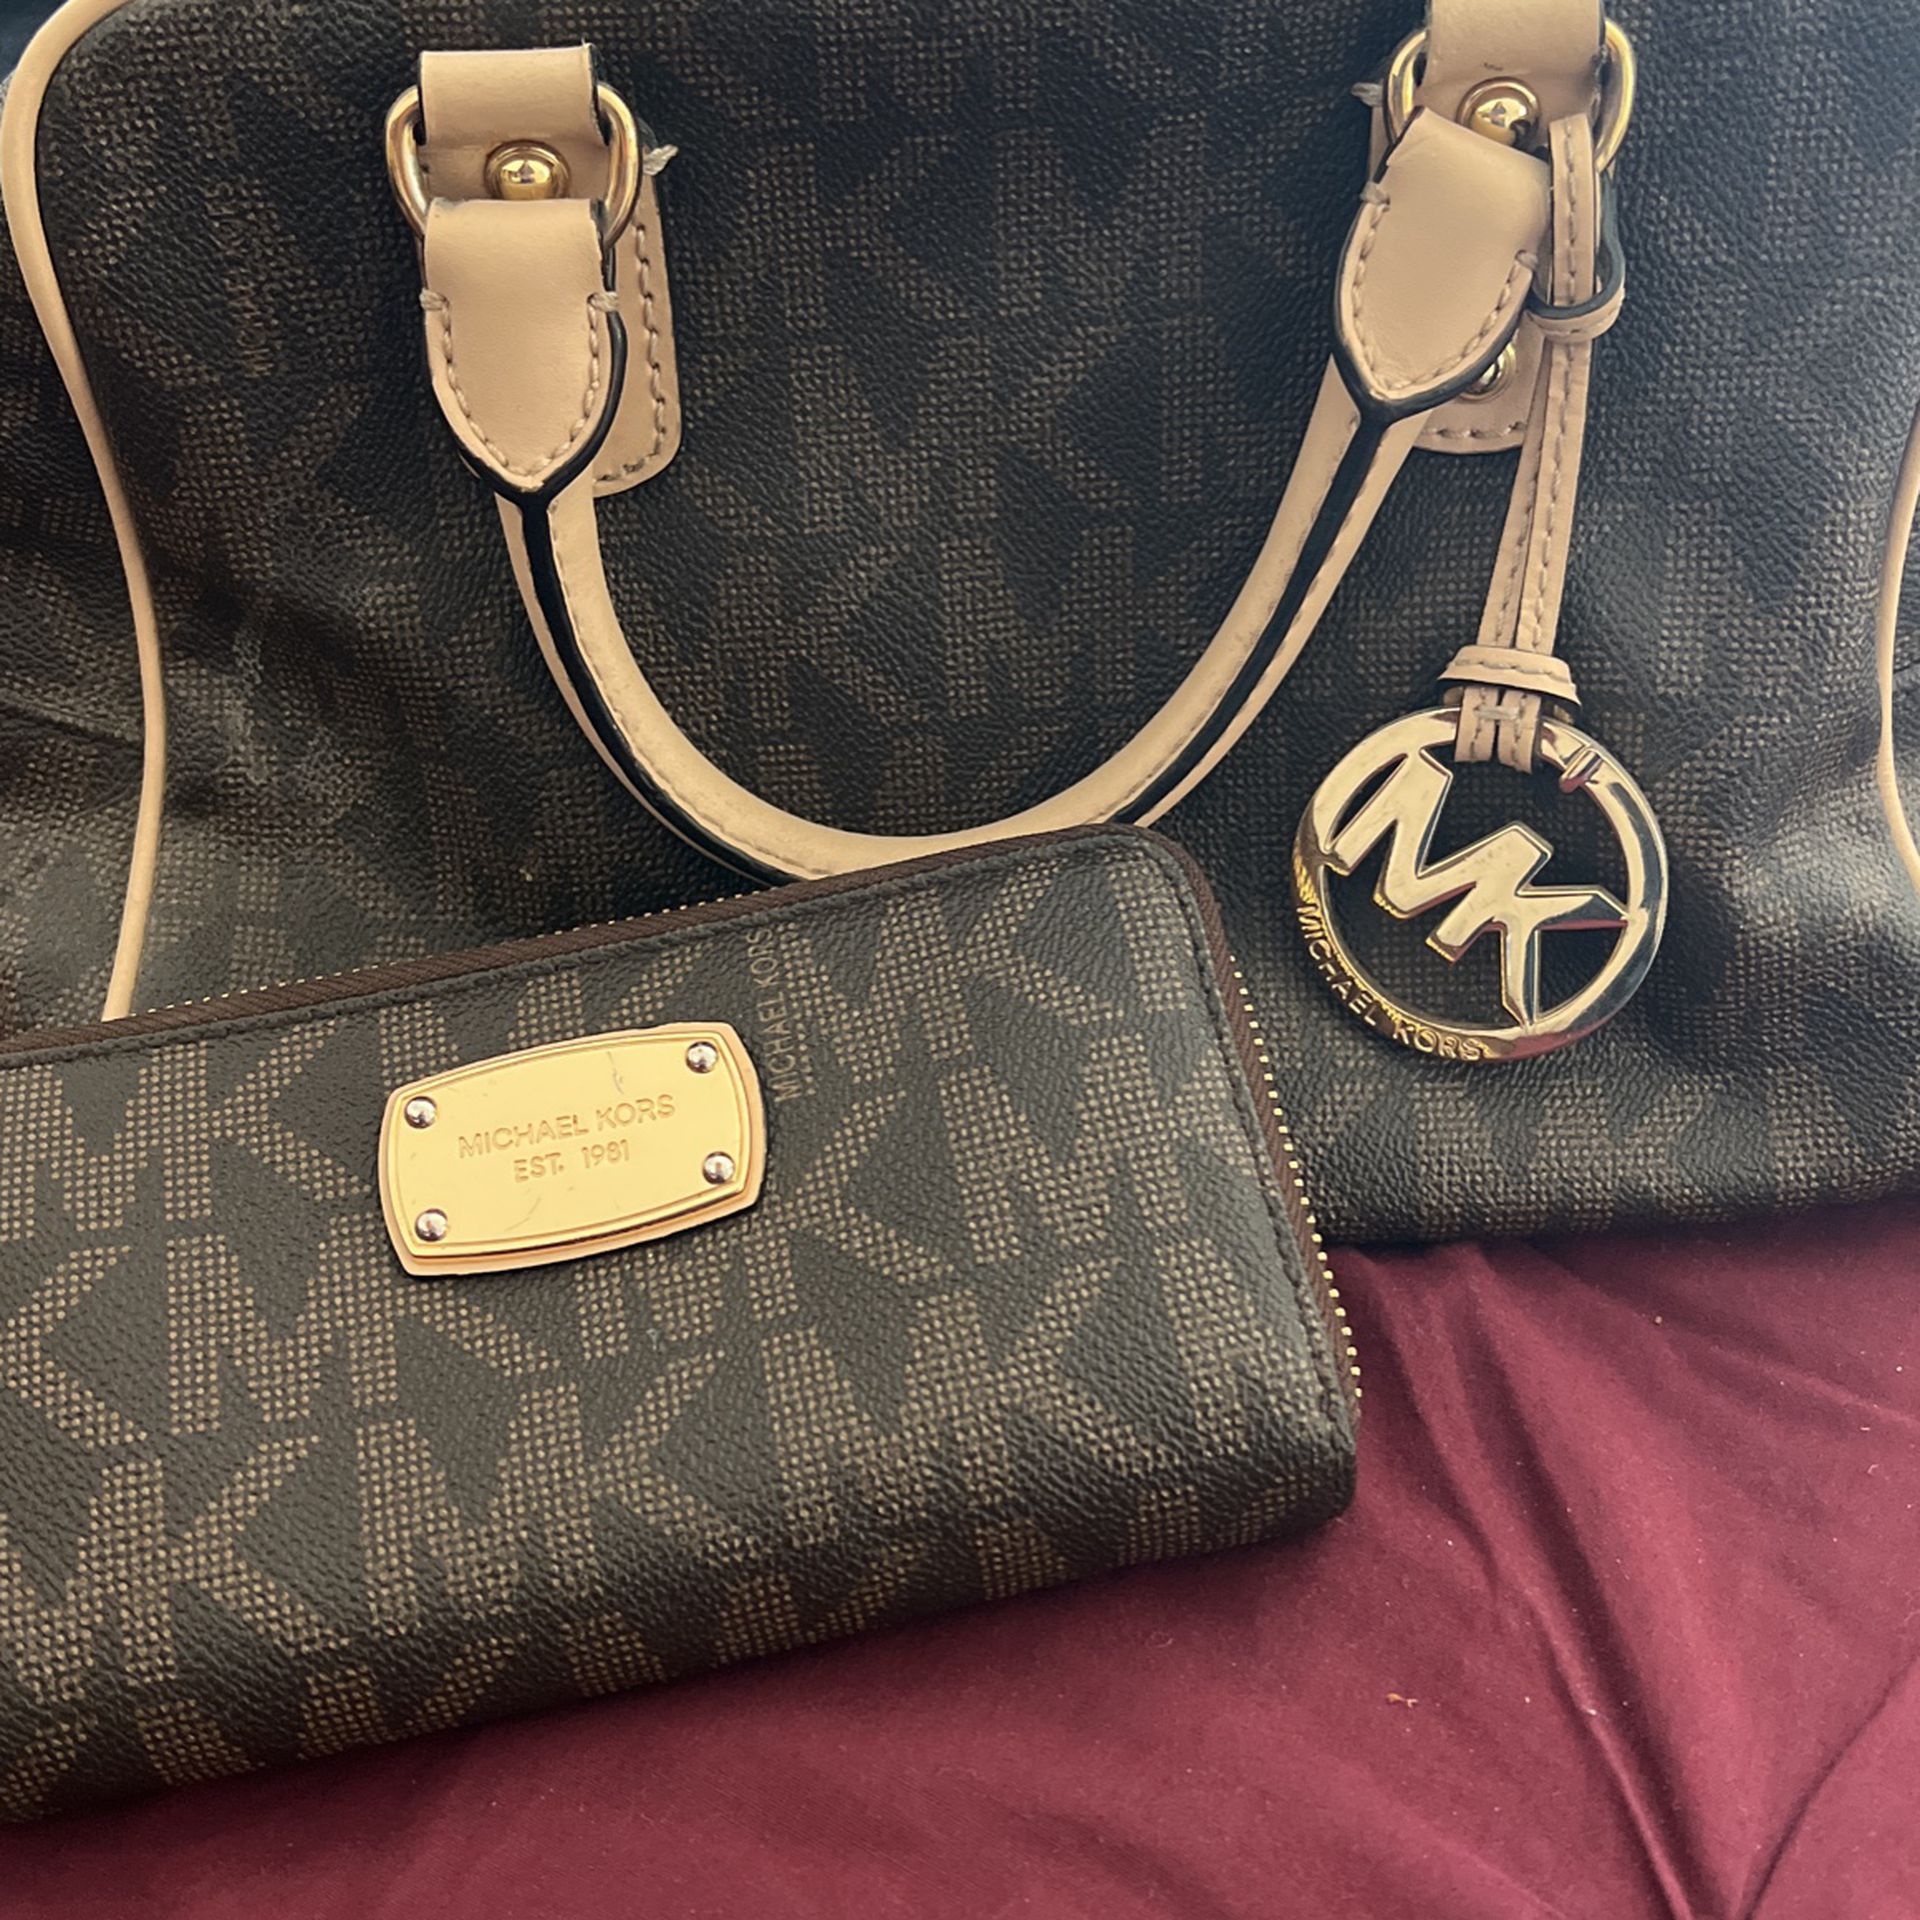 Micheal Kors Purse With Wallet